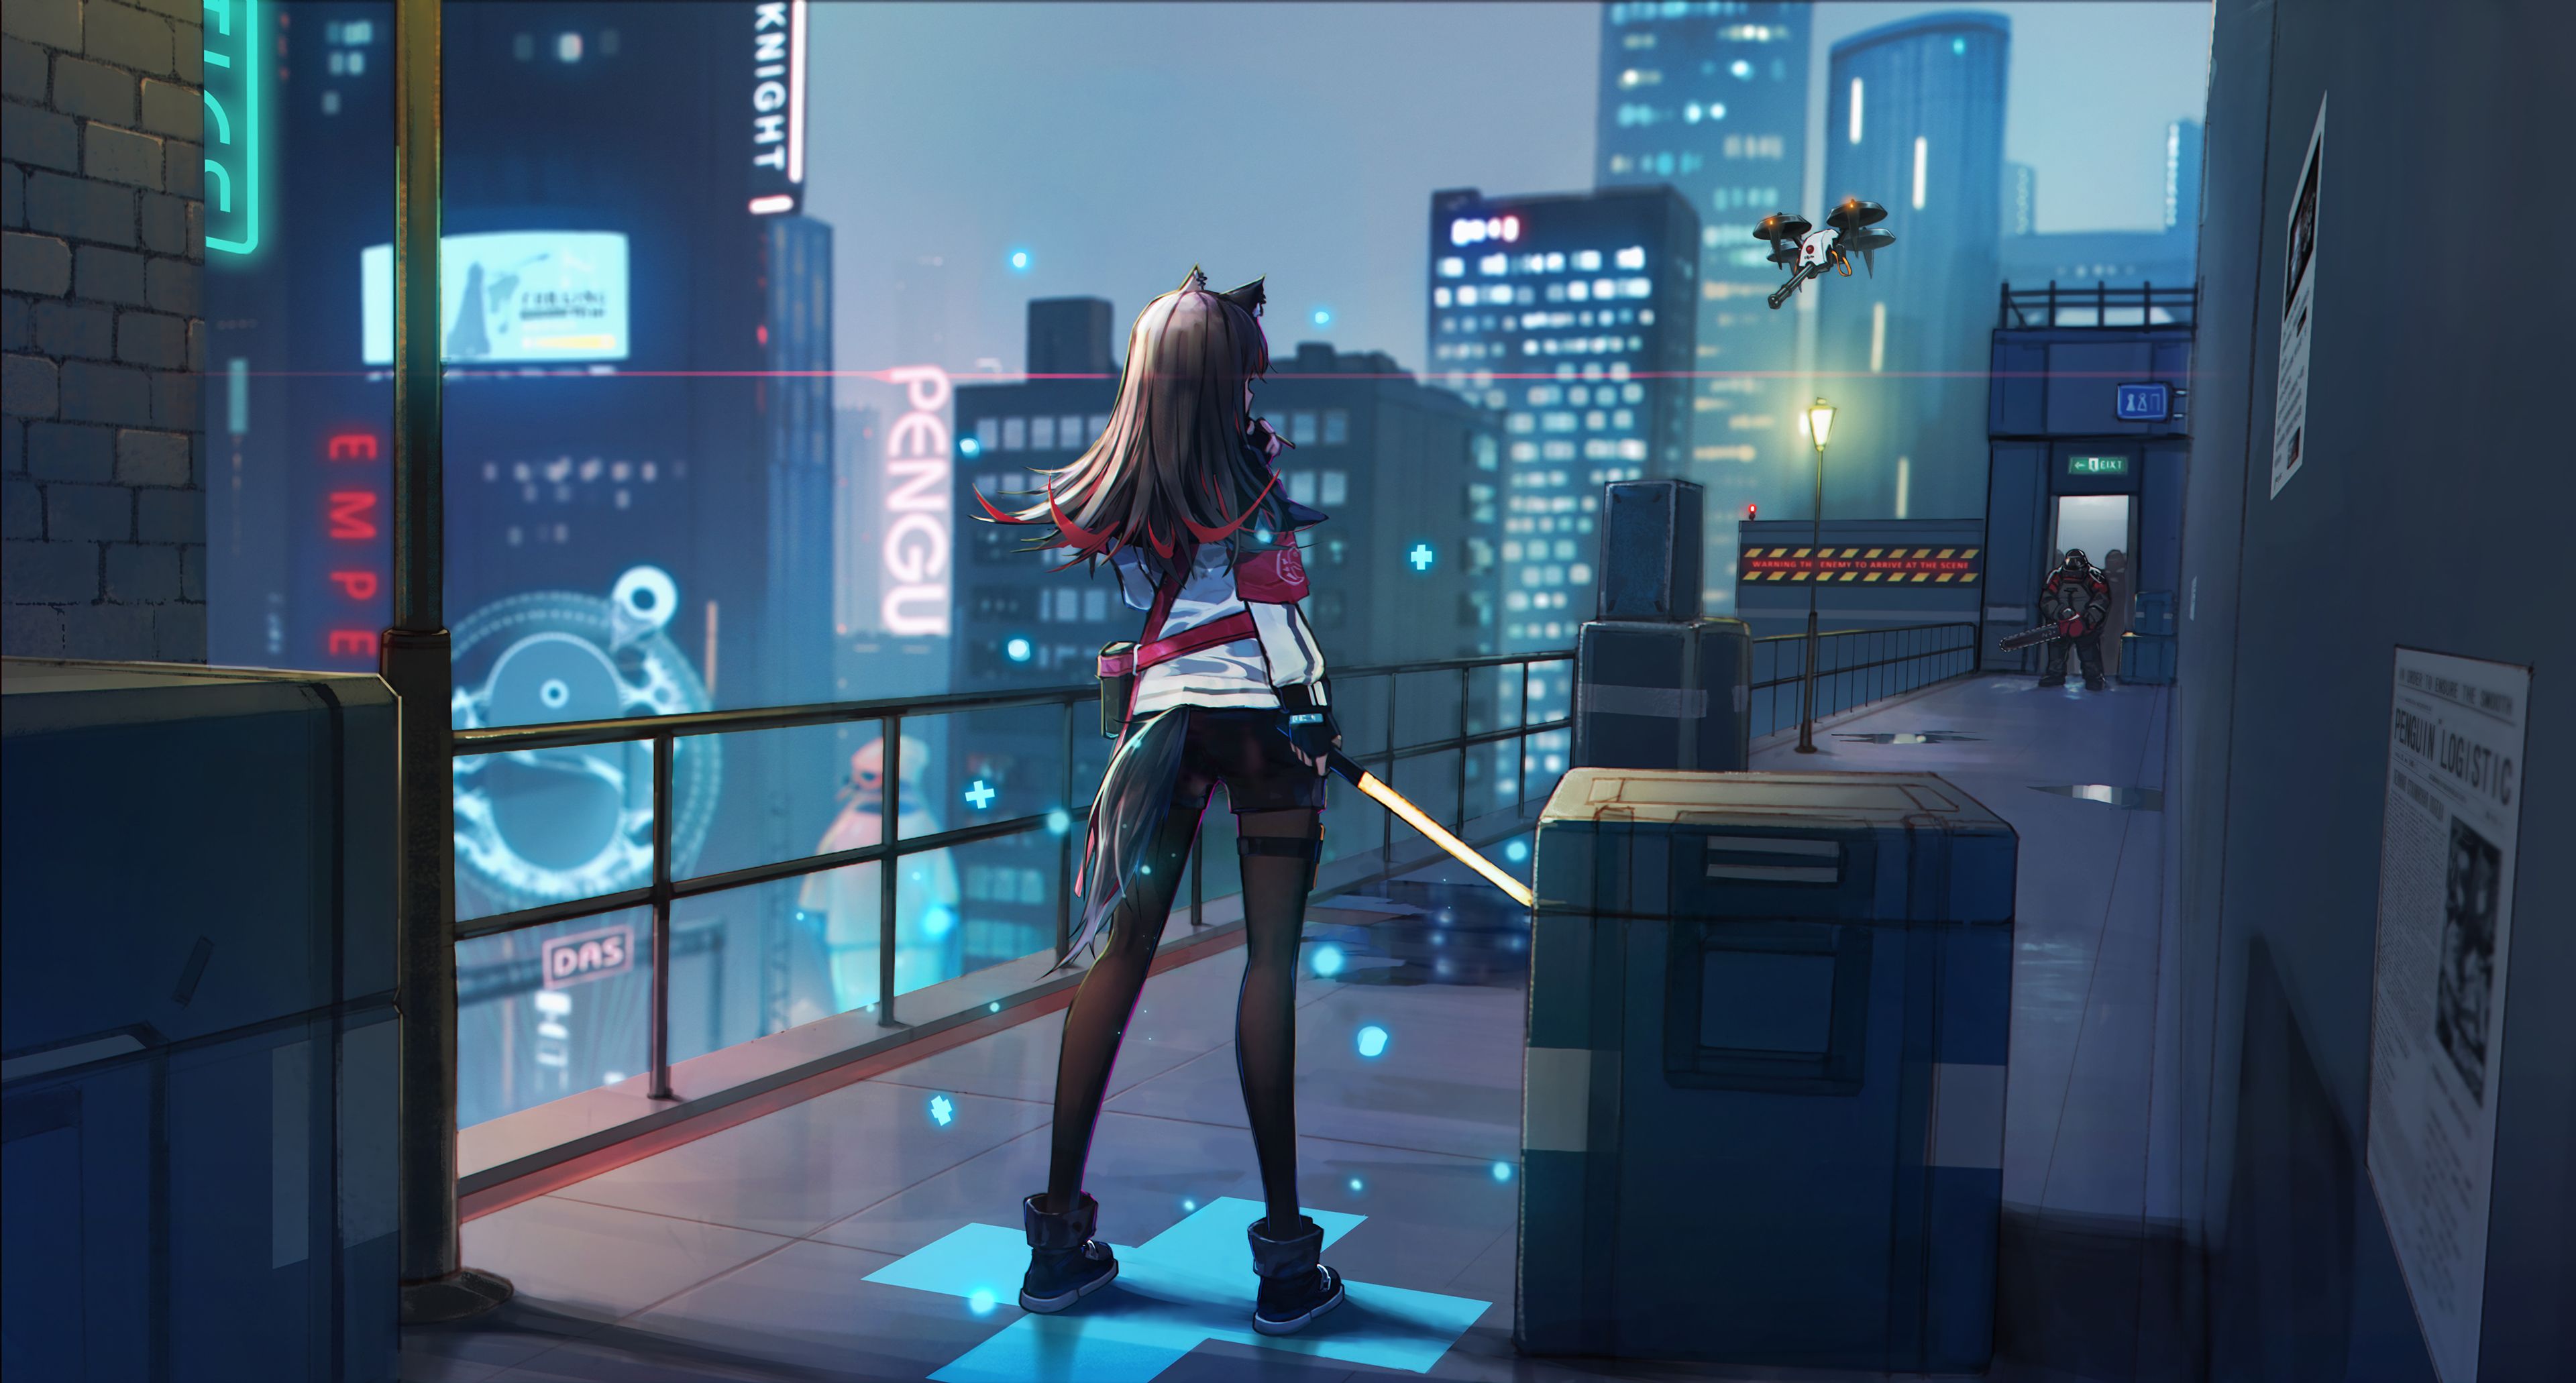 Wallpaper 4k Anime Girl Scifi City Roof With Weapon